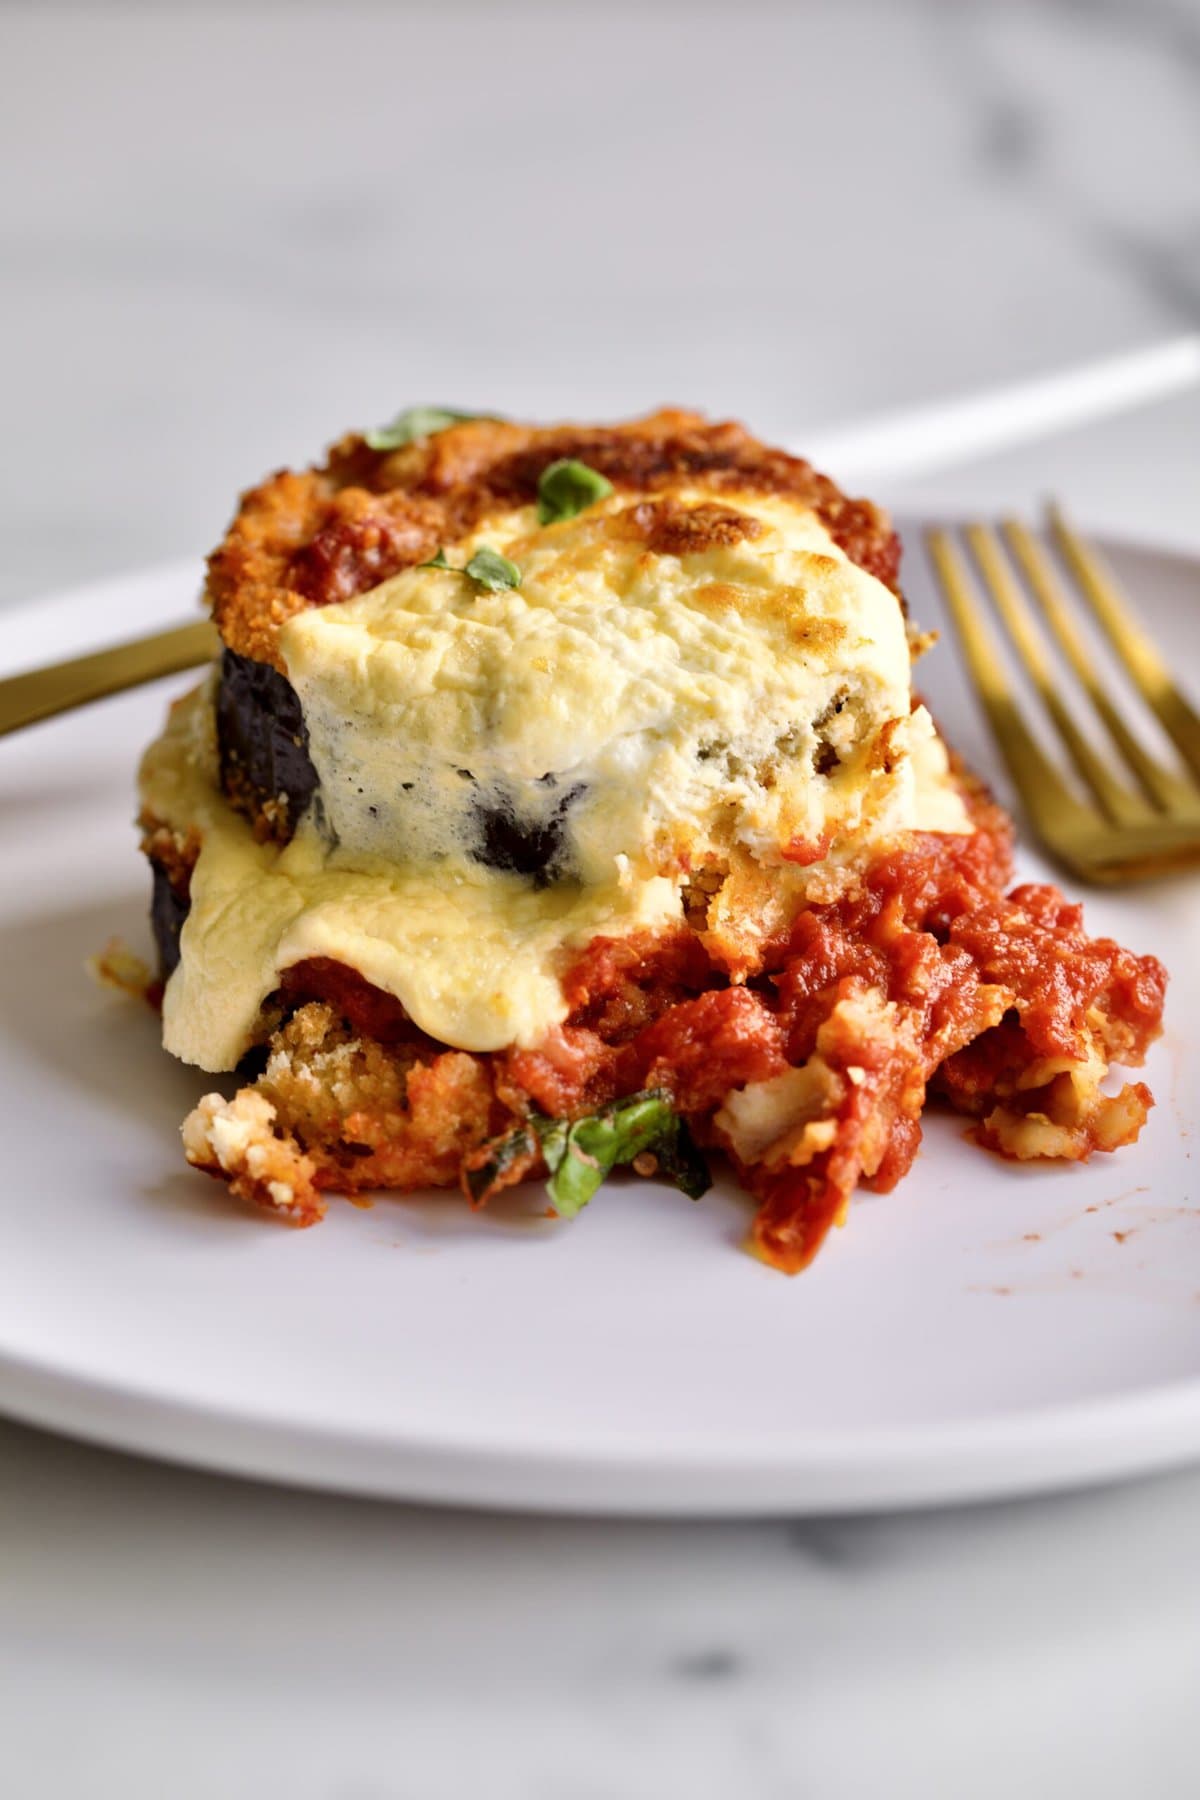 baked eggplant slice on a plate with fork and knife.